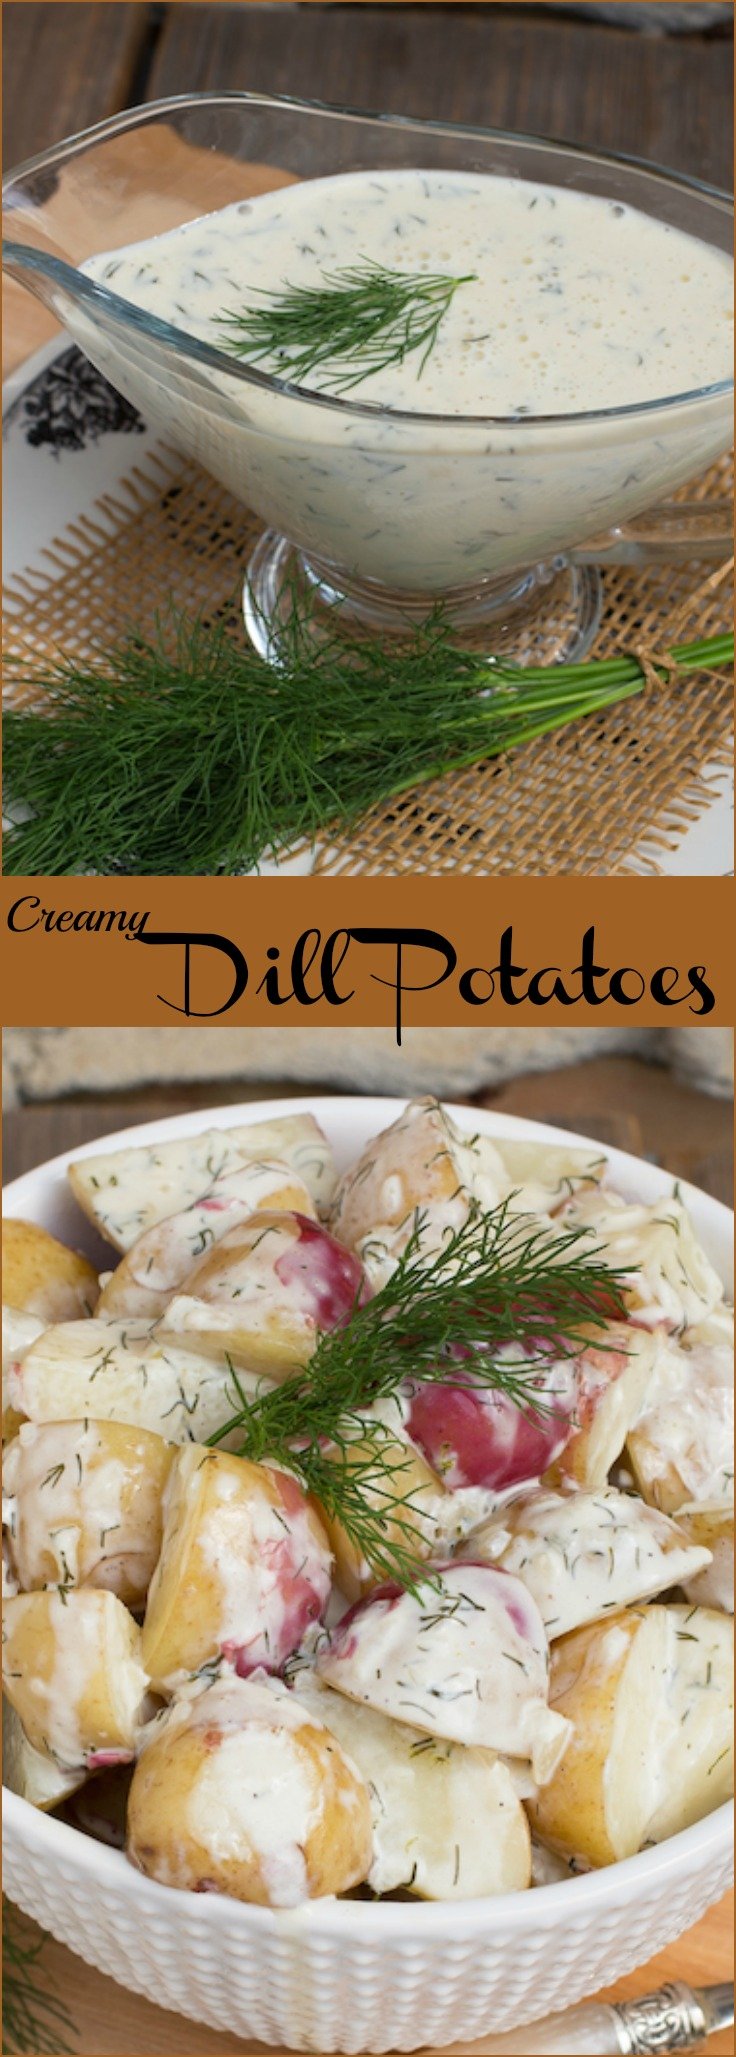 New potatoes with creamy dill sauce